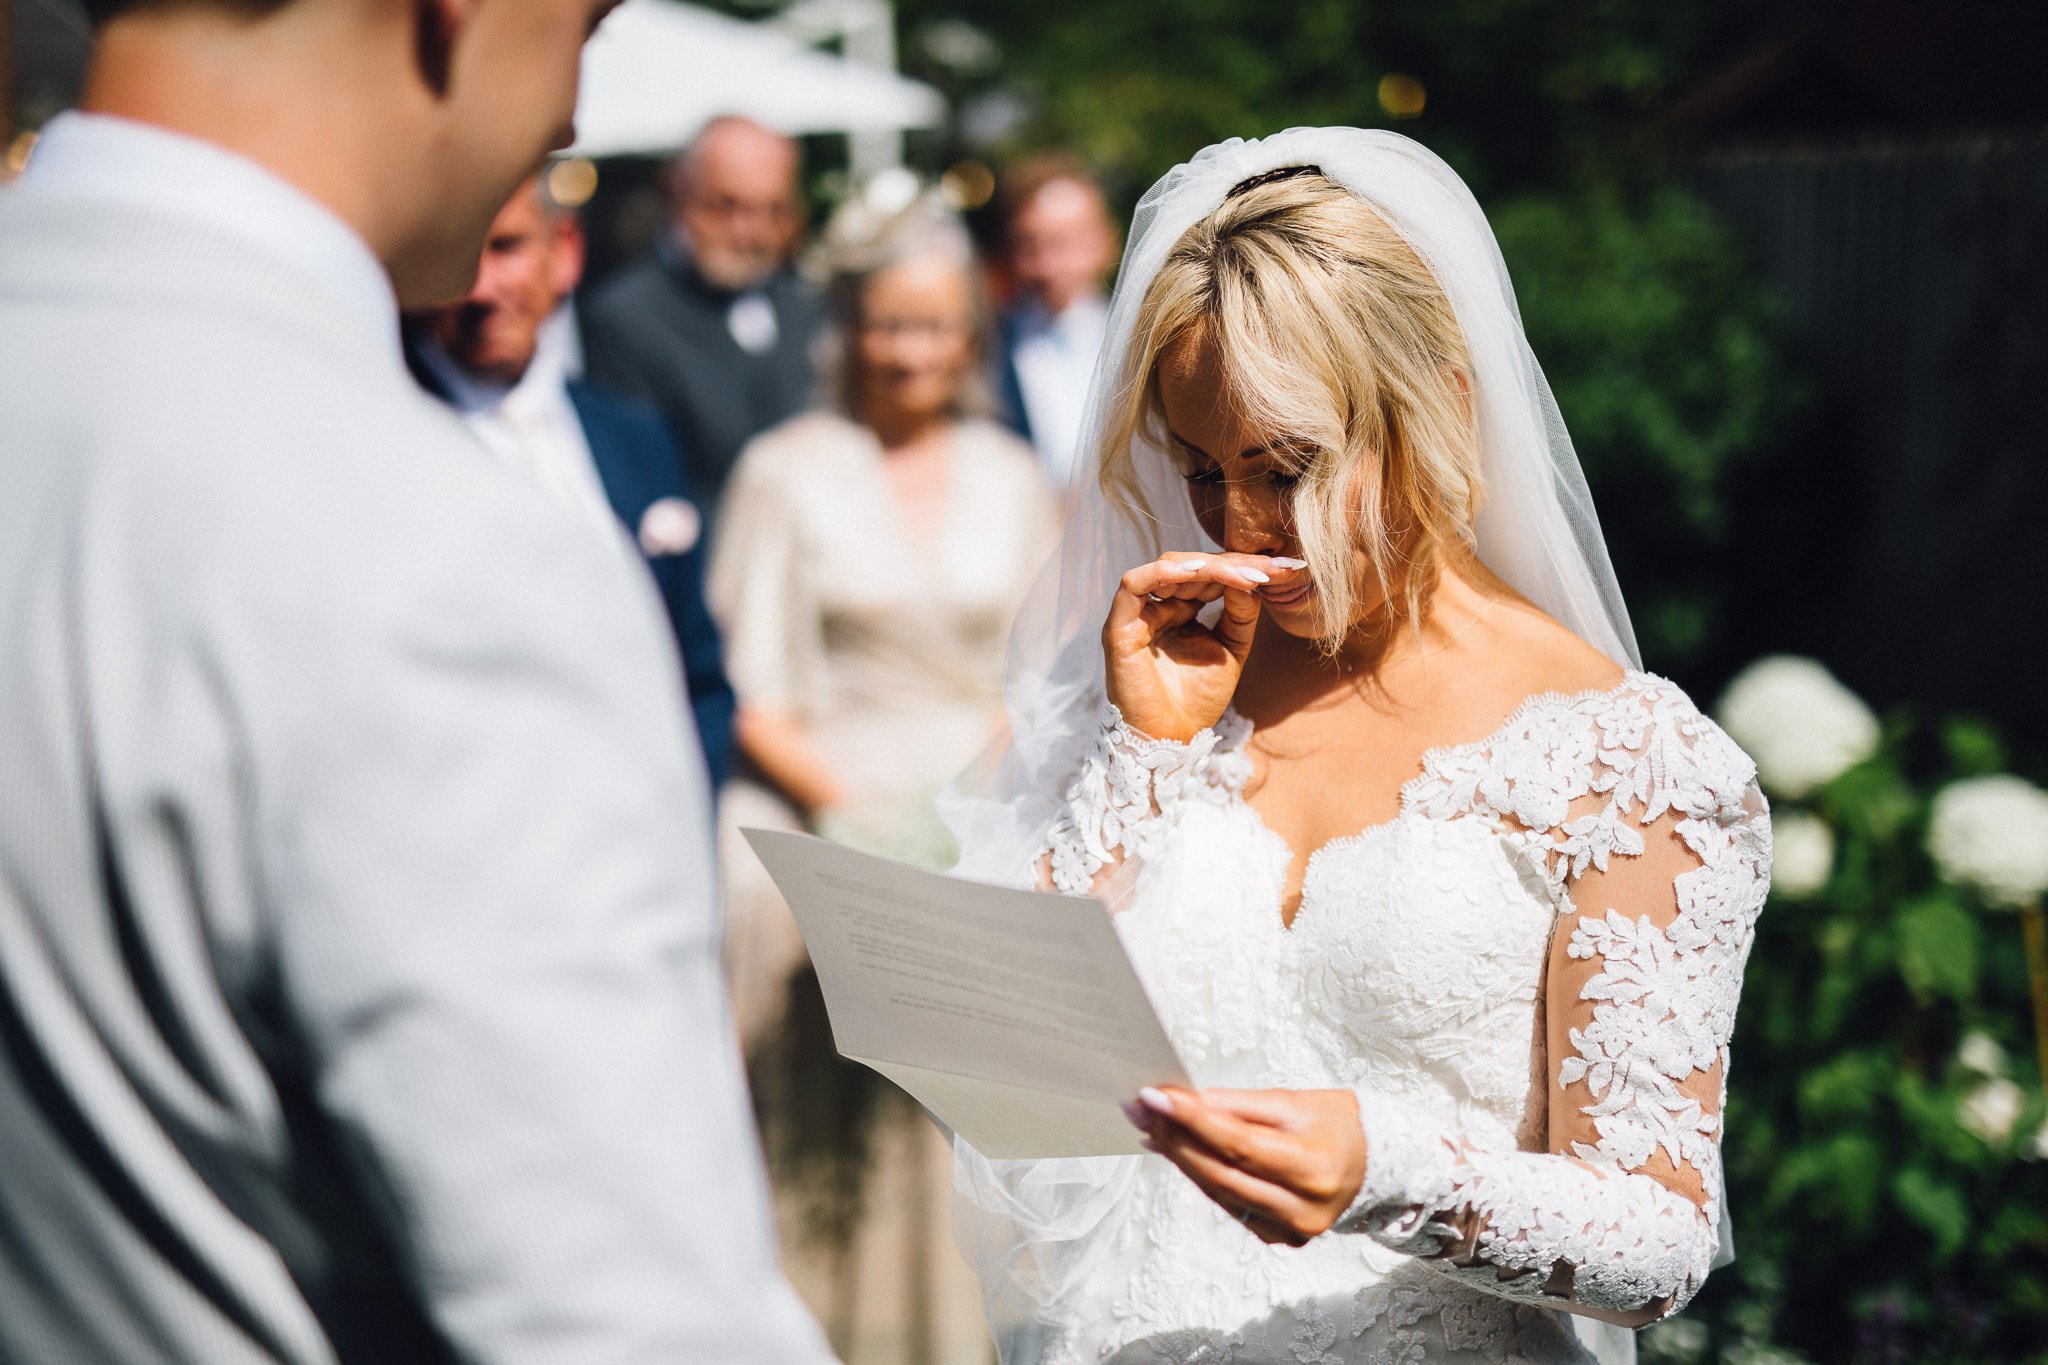  Bride gets emotional as she reads her vows during the wedding ceremony 